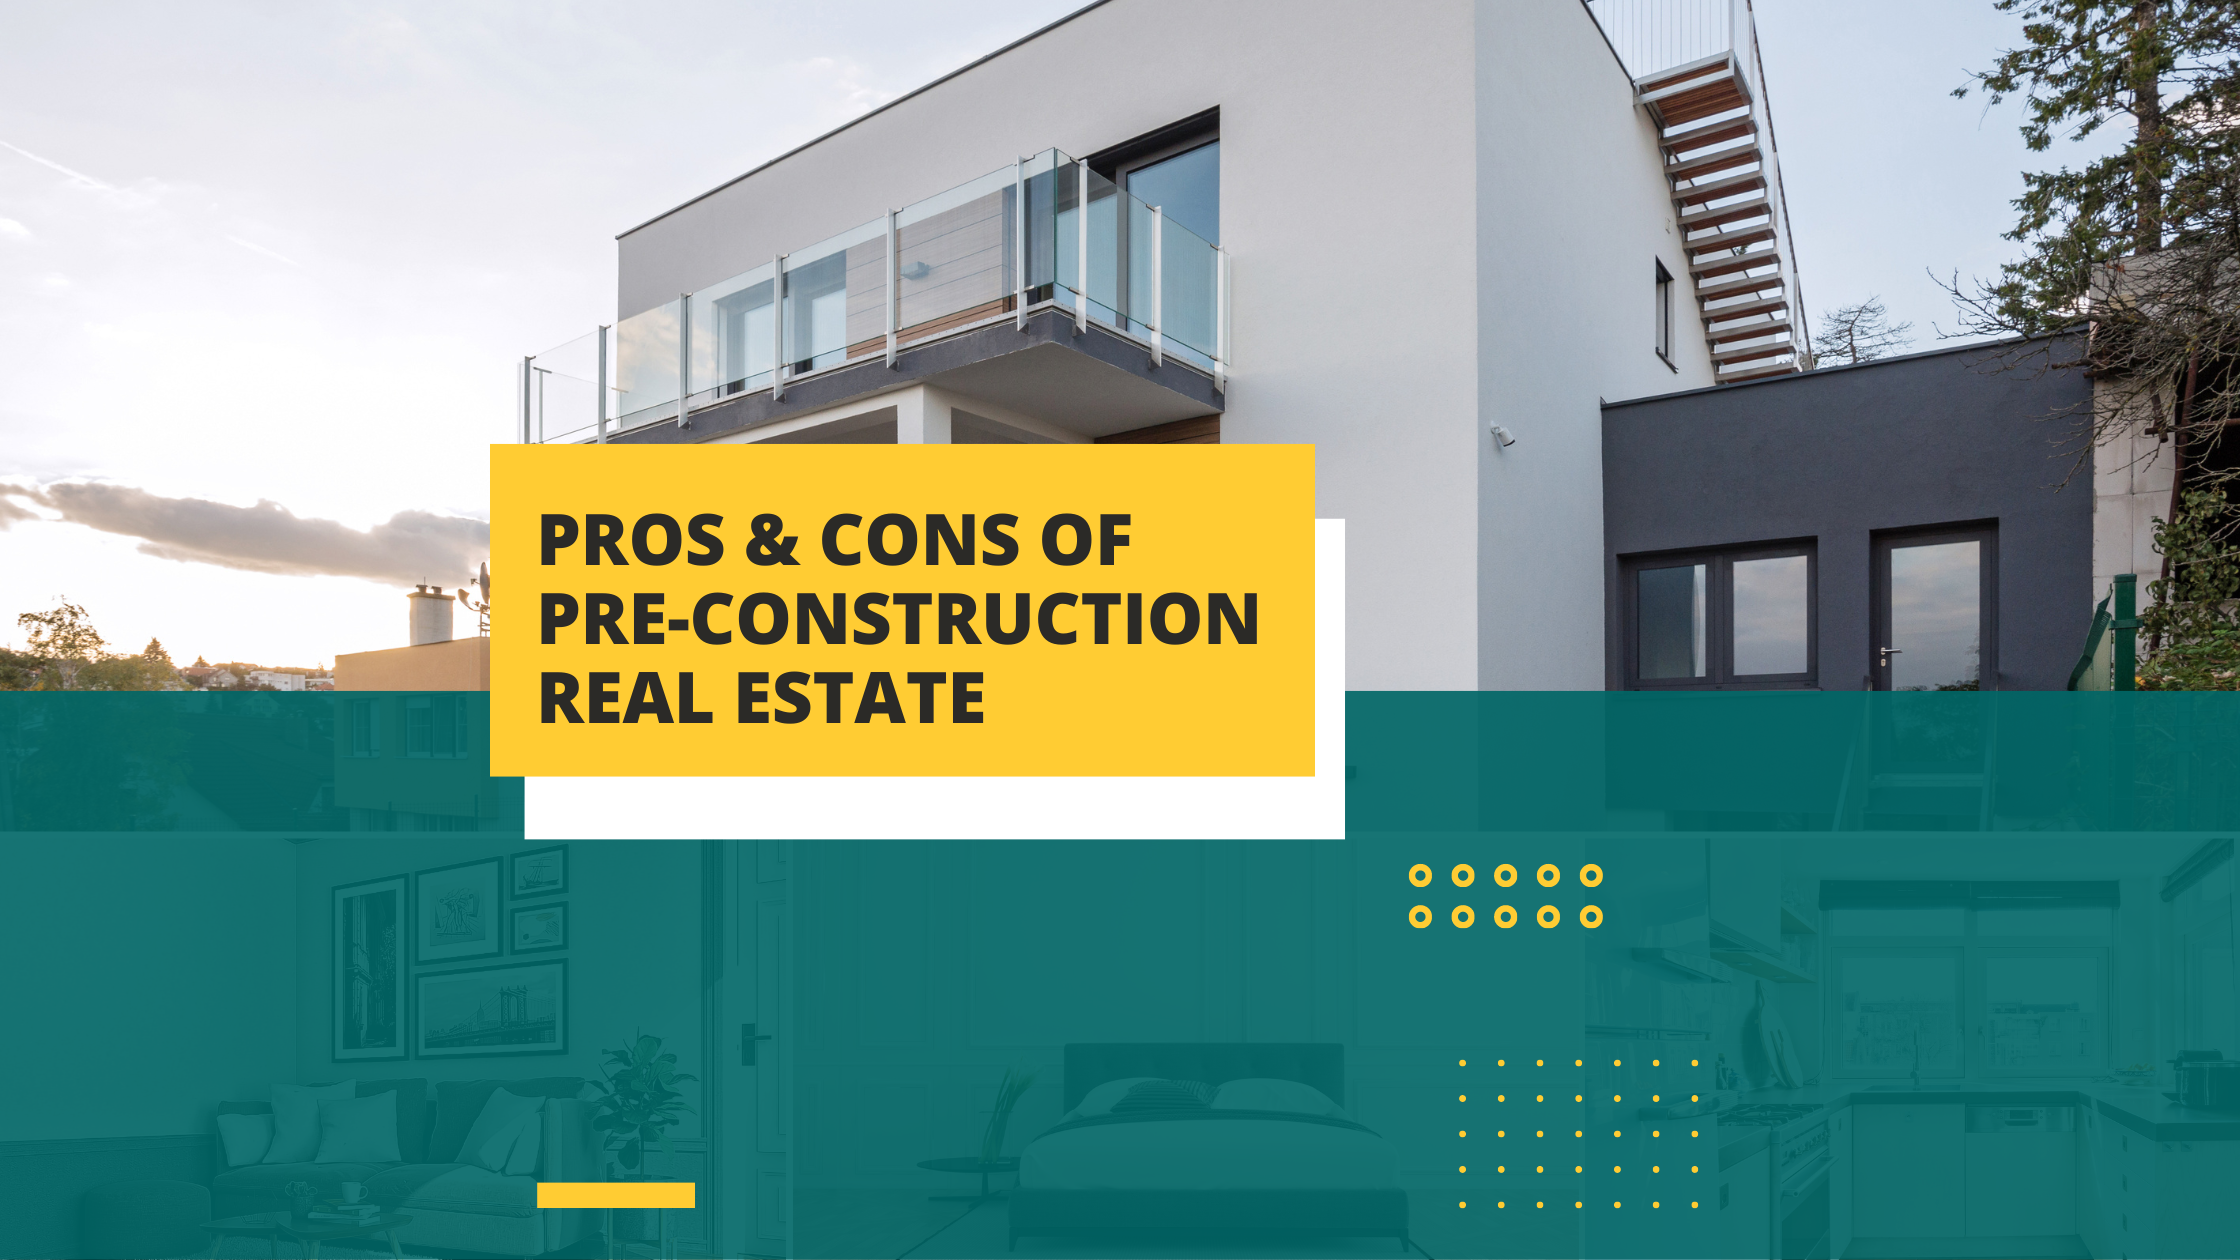 Pros & Cons of Preconstruction Real Estate